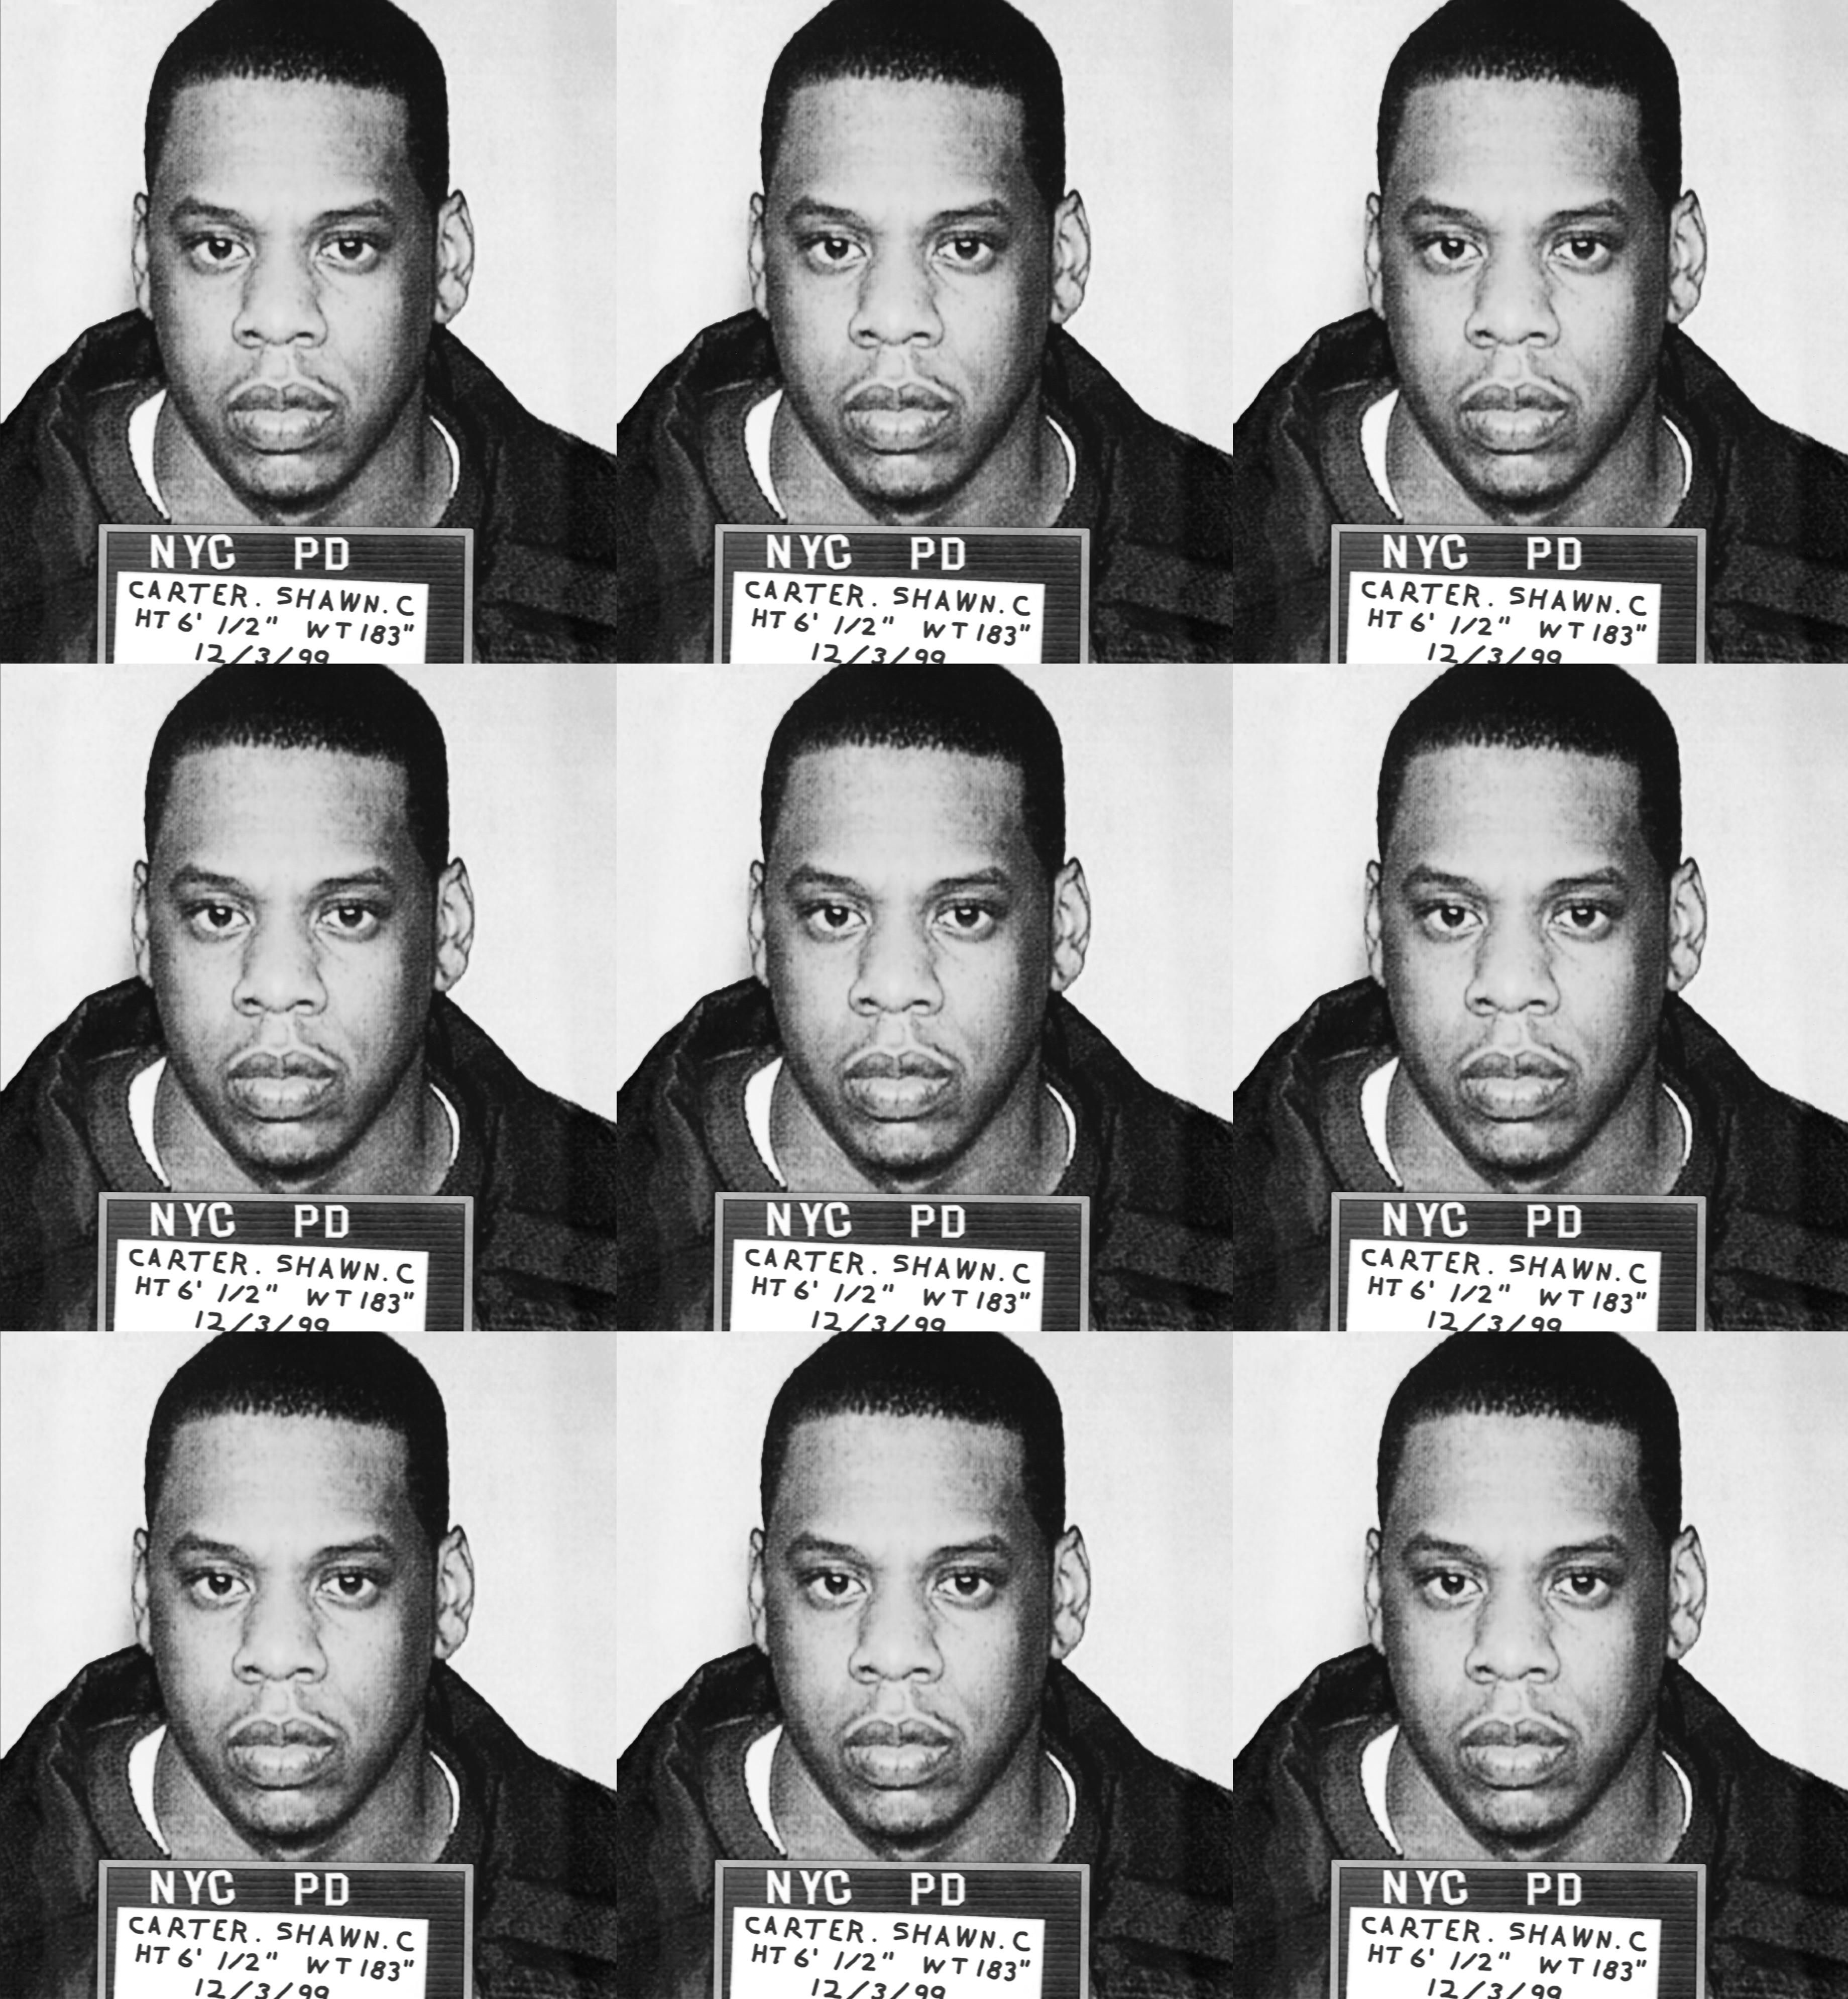 "Jay Z Mugshot" Print on canvas 39 x 36 inch Ed. of 75 by Gerard Marti

Giclee print on canvas
Stretched on wooden bars. 
Signed and numbered by the artist. 


Rap star Jay Z (real name: Shawn Carter) was arrested by New York City cops in December